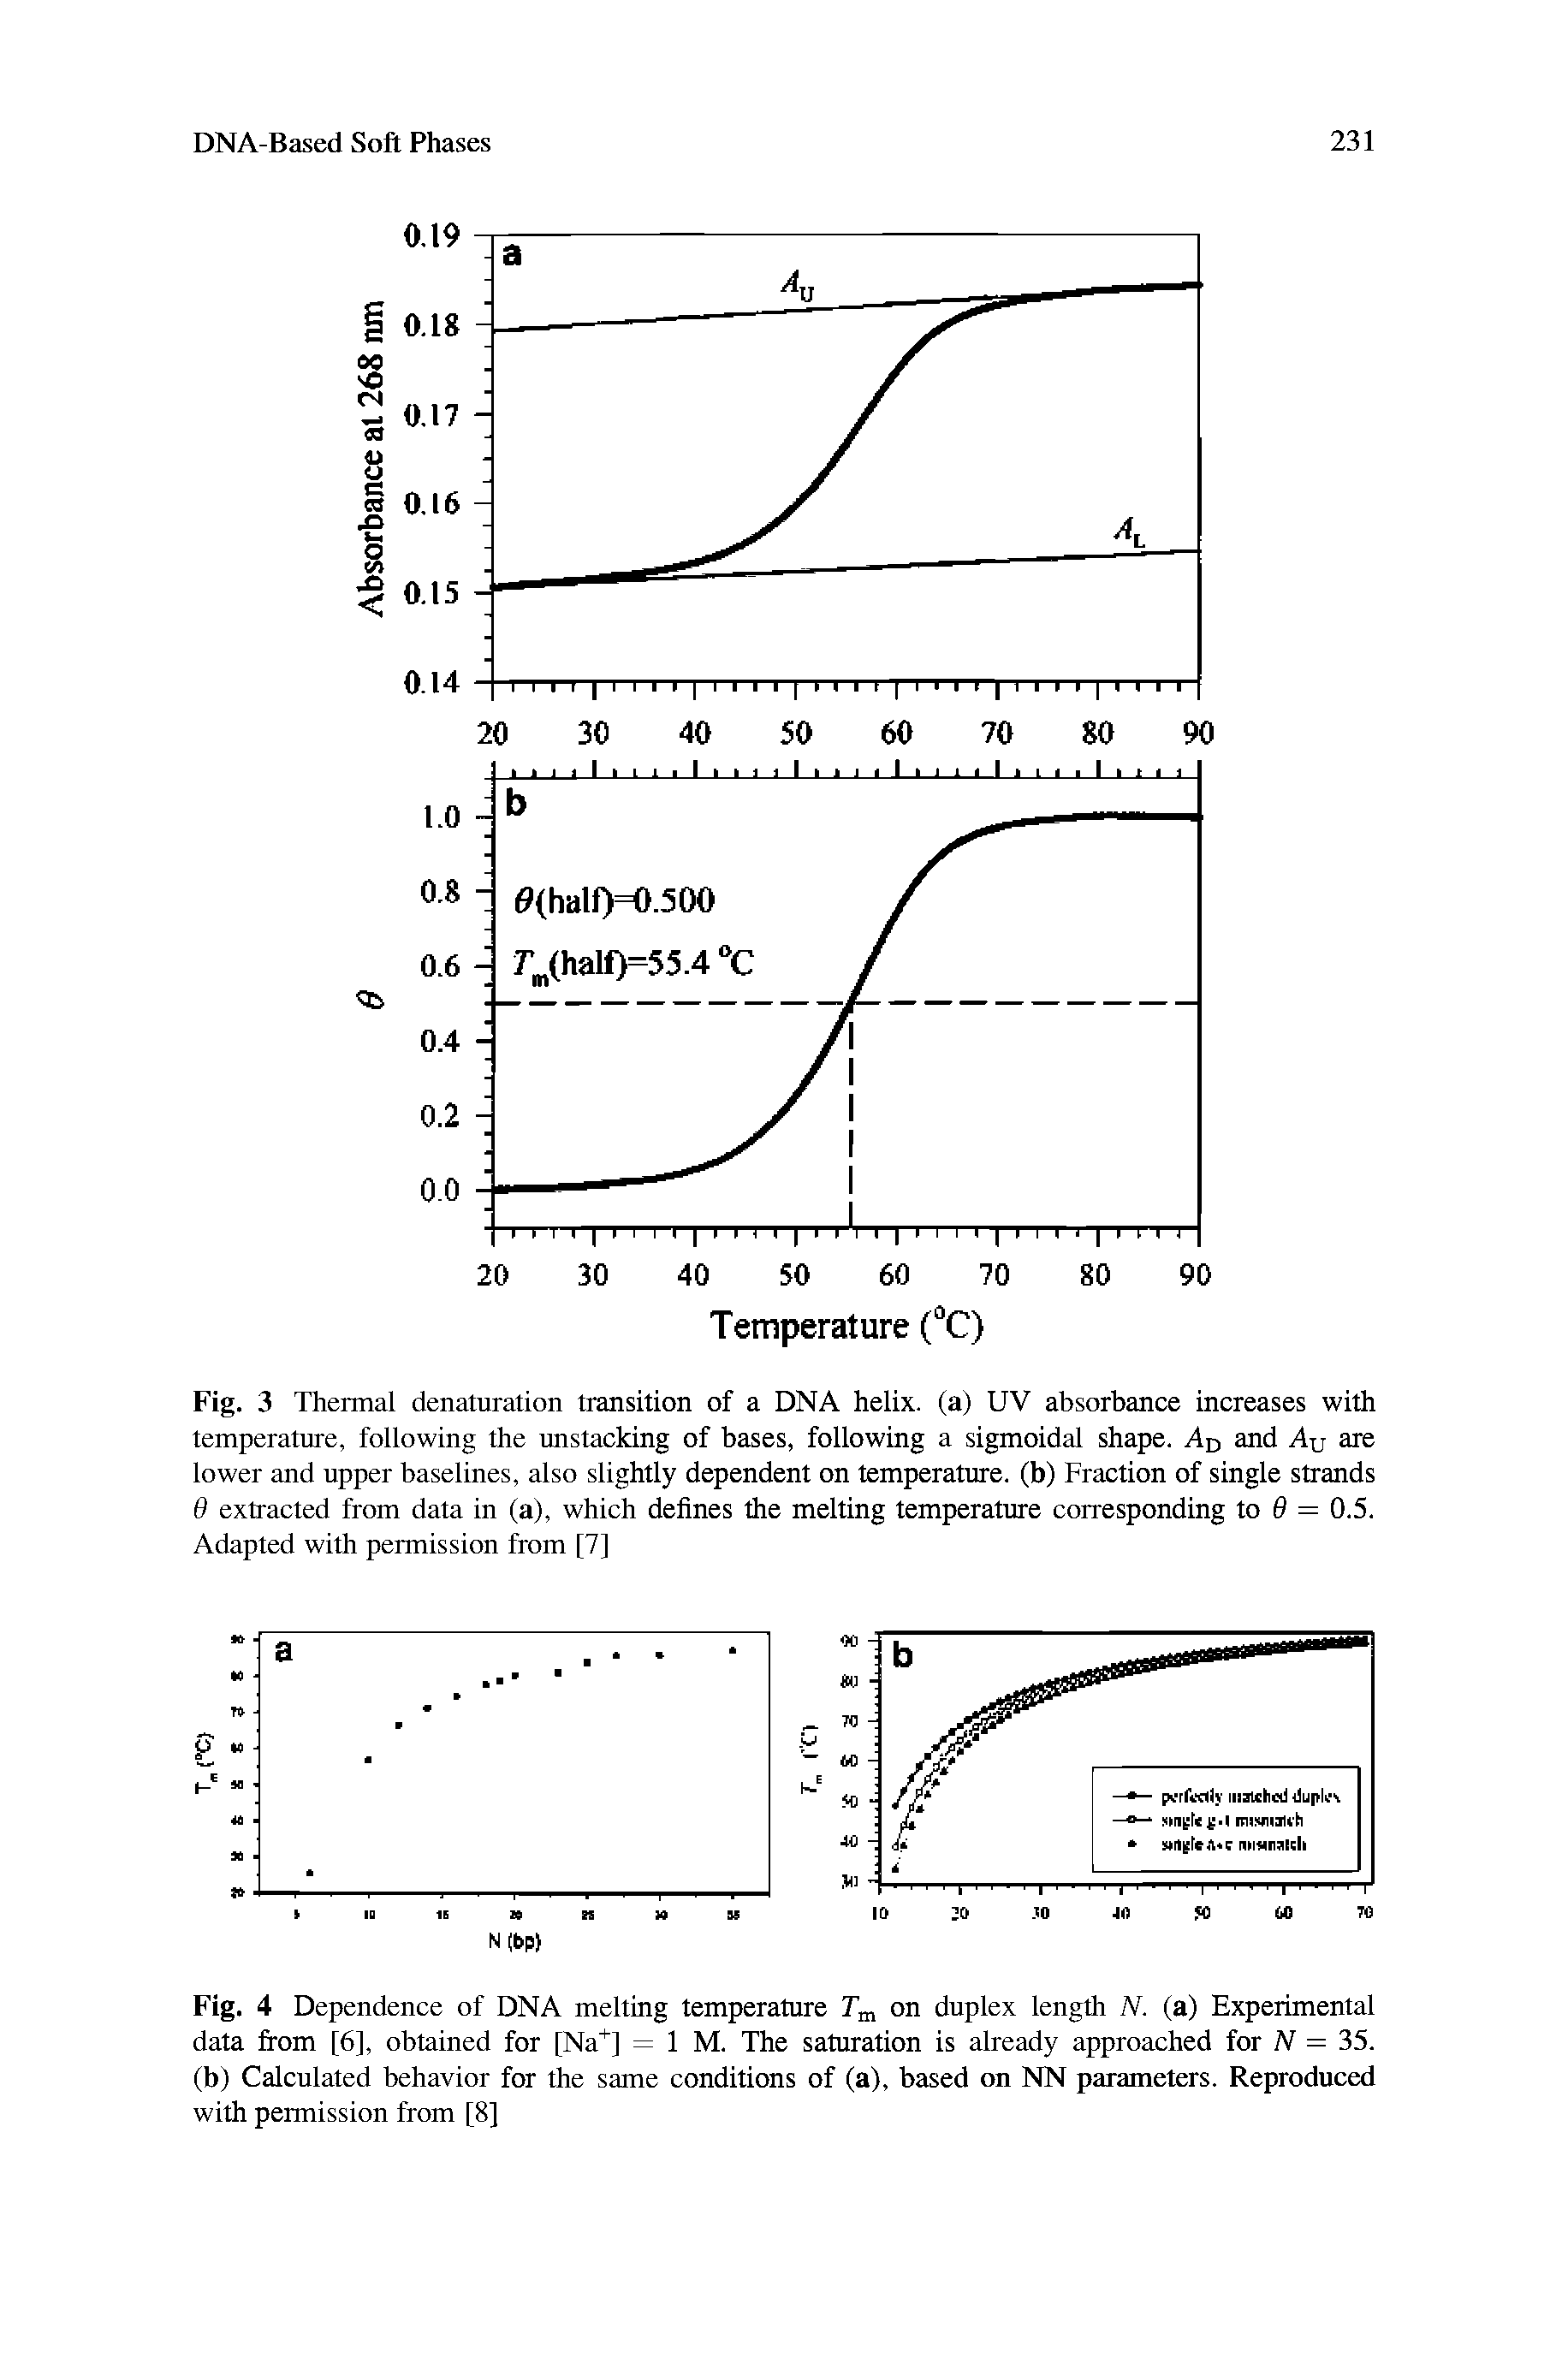 Fig. 3 Thermal denaturation transition of a DNA helix, (a) UV absorbance increases with temperature, following the unstacking of bases, following a sigmoidal shape. AD and Au are lower and upper baselines, also slightly dependent on temperature, (b) Fraction of single strands 6 extracted from data in (a), which defines the melting temperature corresponding to 9 = 0.5. Adapted with permission from [7]...